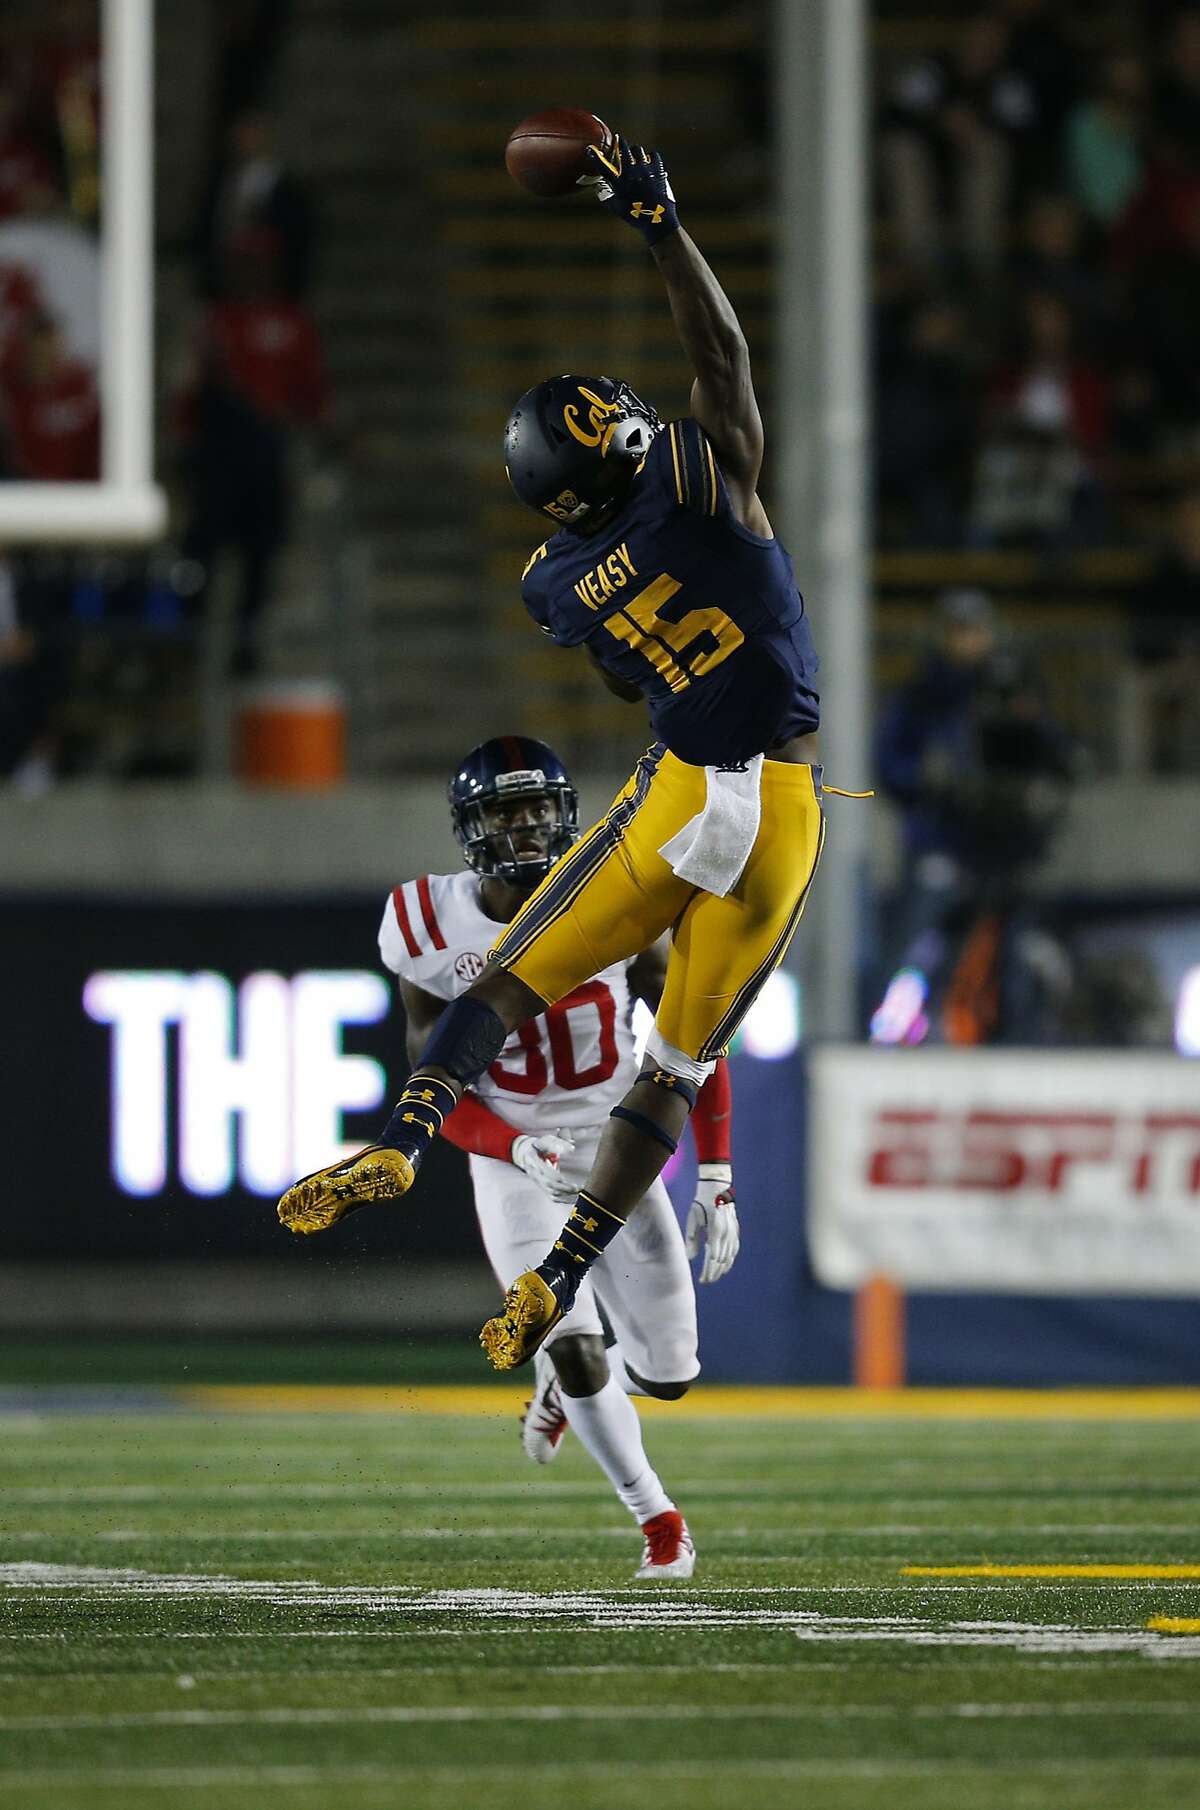 California Golden Bears wide receiver Jordan Veasy (15) makes the reception after tipping and juggling the ball down during the first half of an NCAA football game between the California Golden Bears and the Mississippi Rebels at California Memorial Stadium on Saturday, Sept. 16, 2017, in Berkeley, in Berkeley, Calif. The Rebels lead 16-7 at halftime.